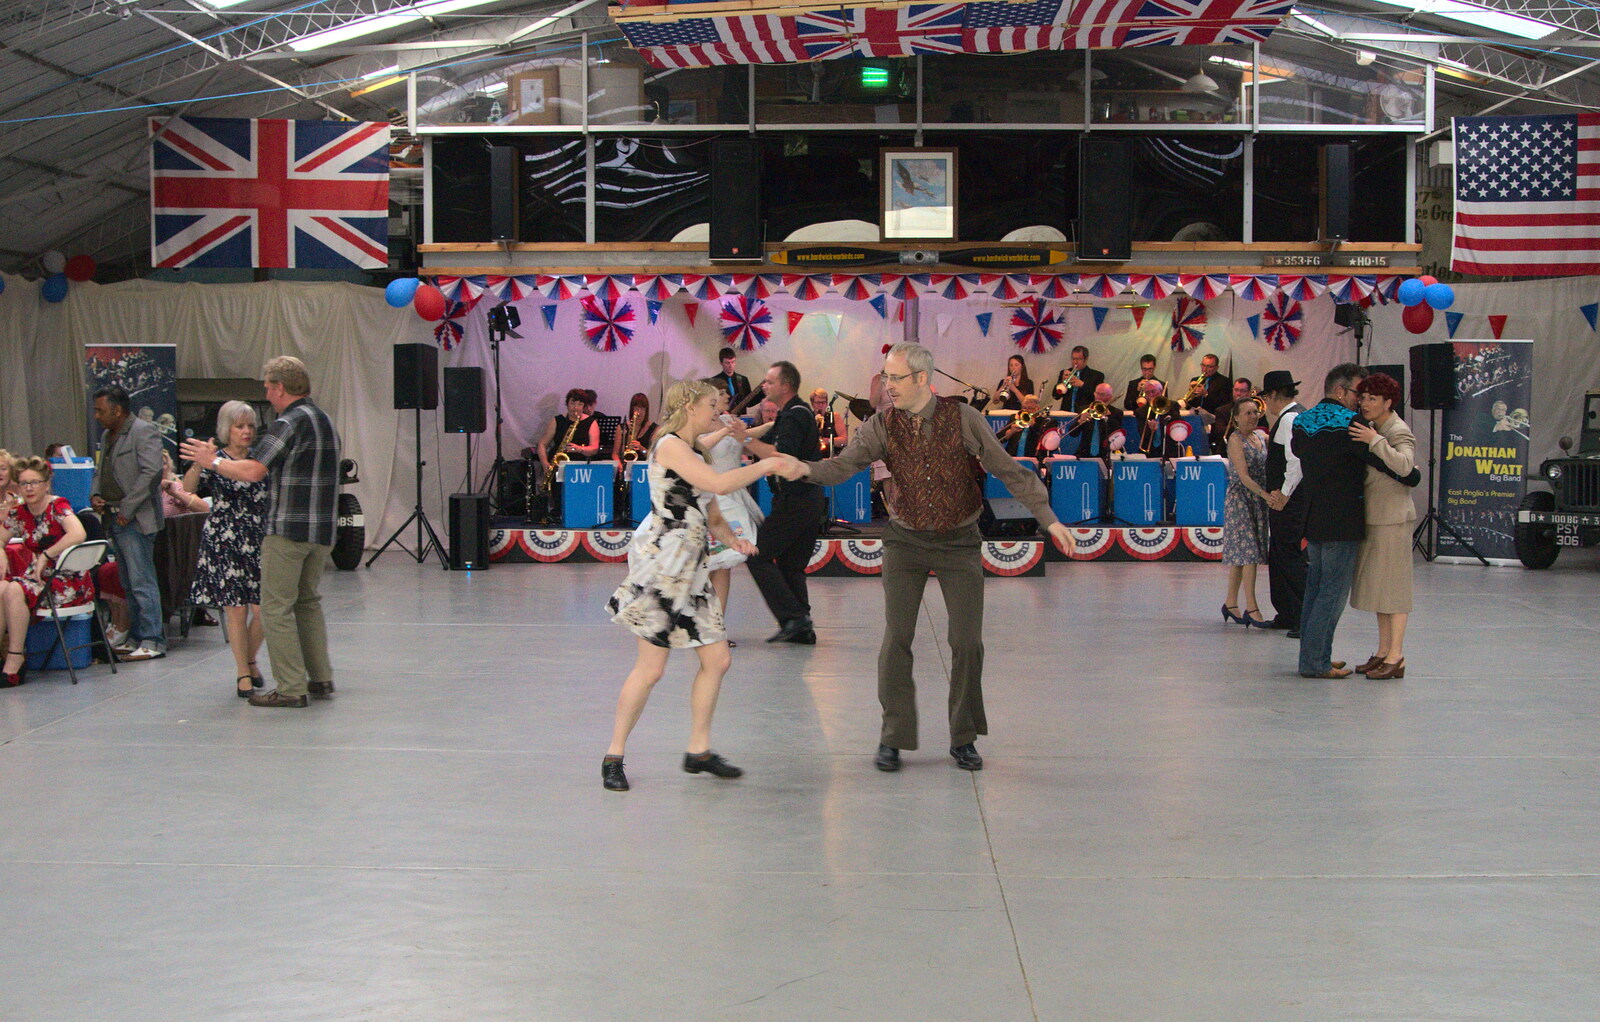 Paul and Dawn throw some cool moves from "Our Little Friends" Warbirds Hangar Dance, Hardwick, Norfolk - 9th July 2016